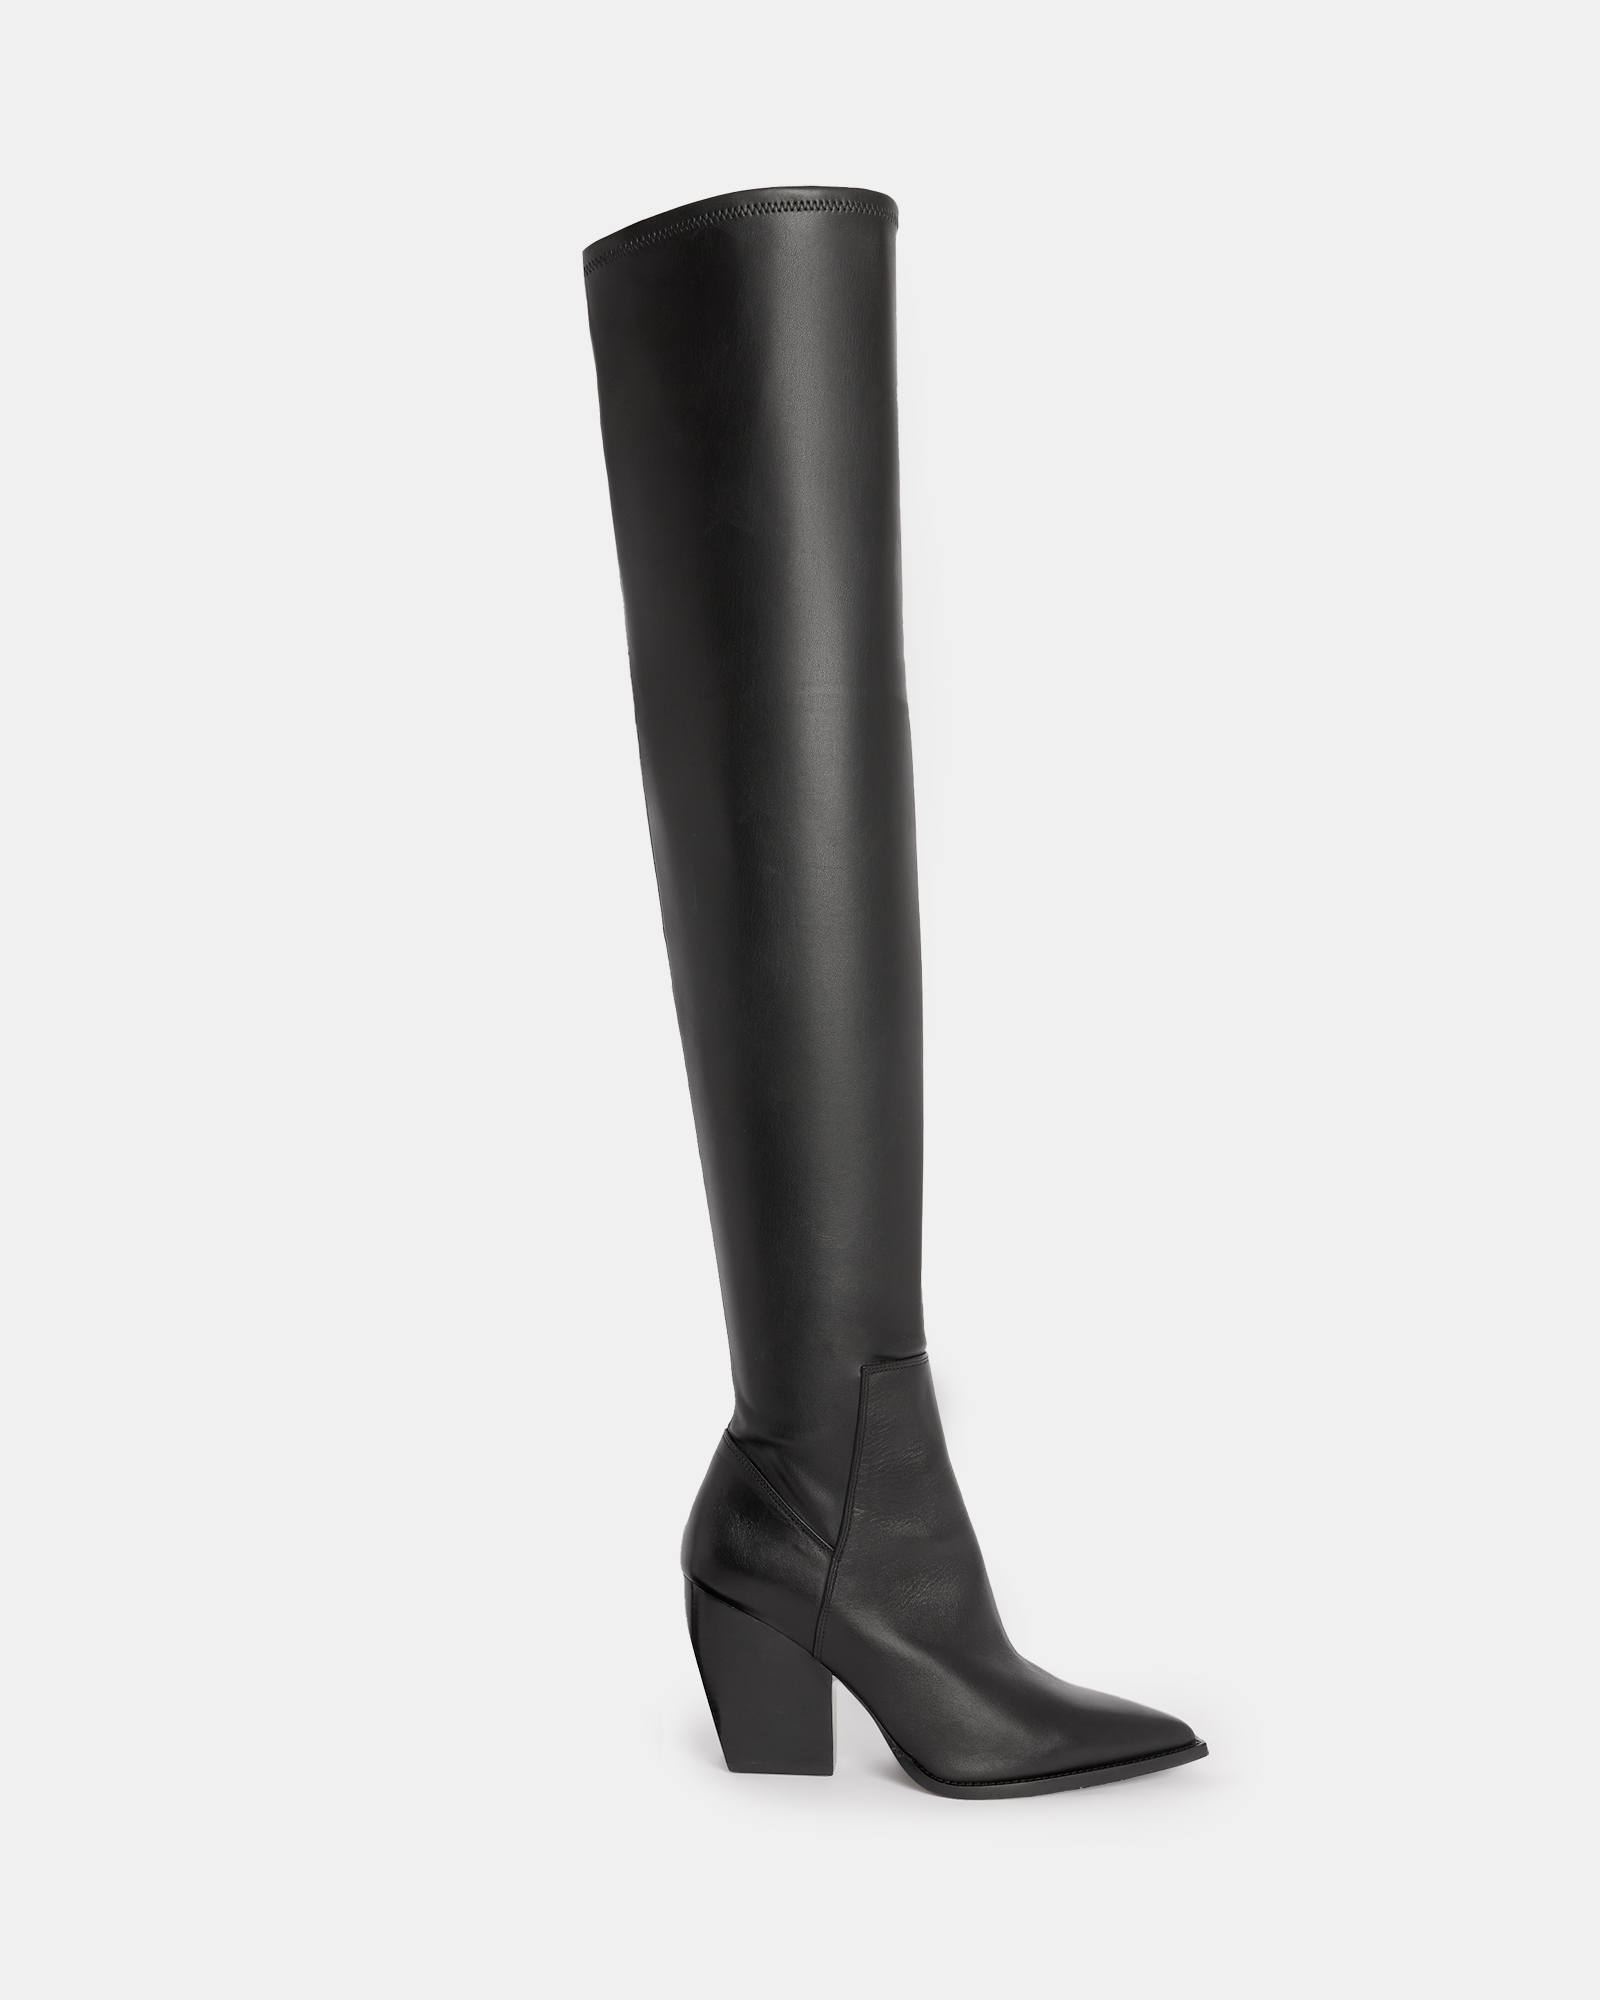 AllSaints Lara Stretchy Over The Knee Boots,, Black